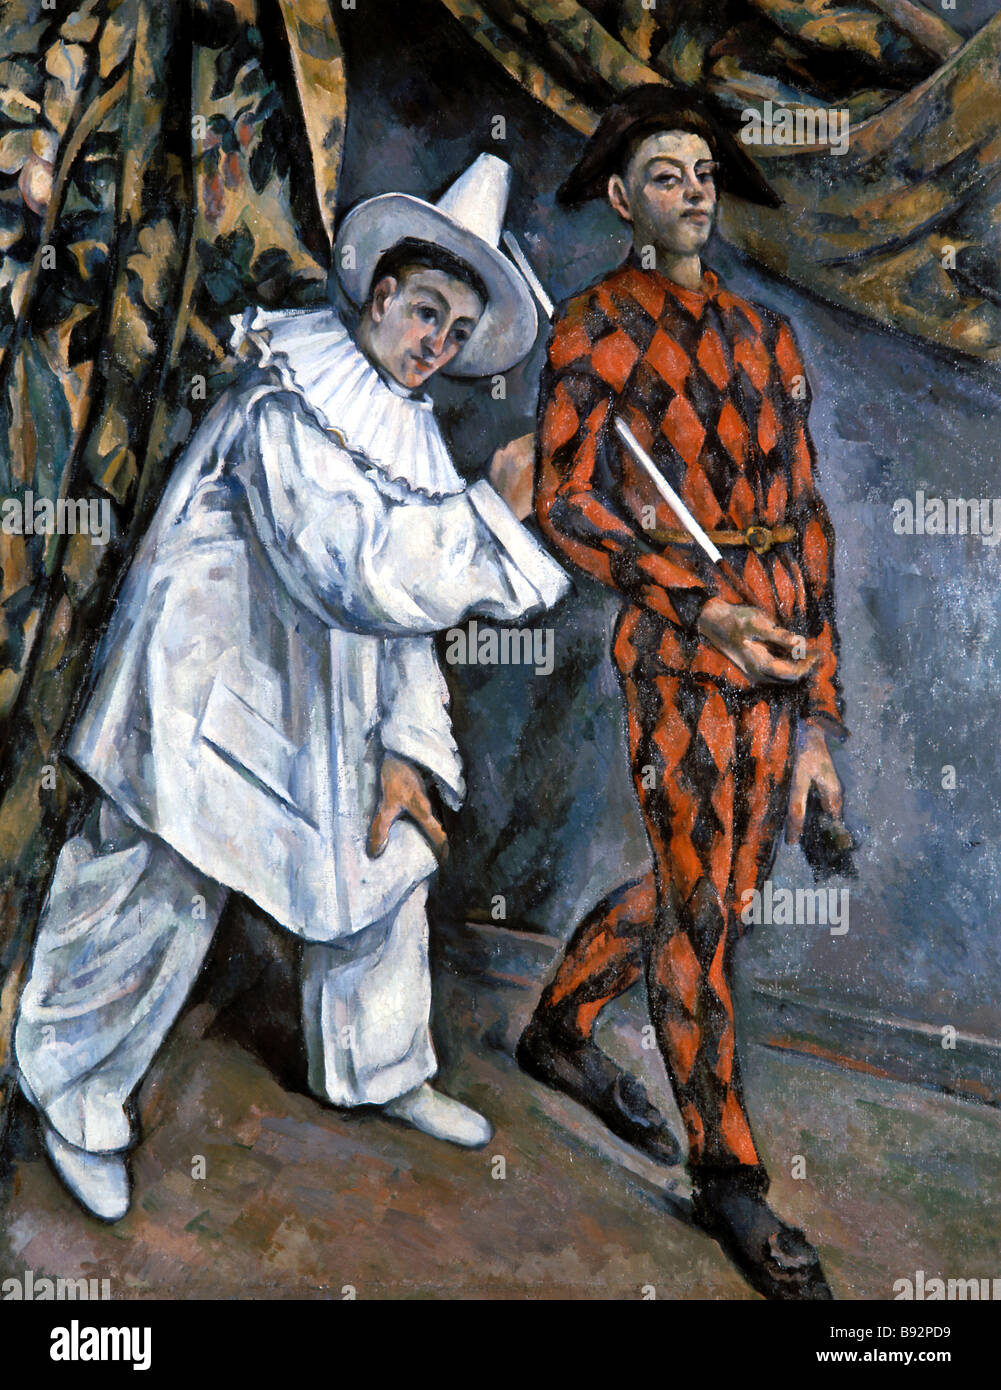 Paul Cezanne 1839 1906 Pierrot and Harlequin Oil on canvas 1888 Pushkin Museum of Fine Arts Moscow Stock Photo